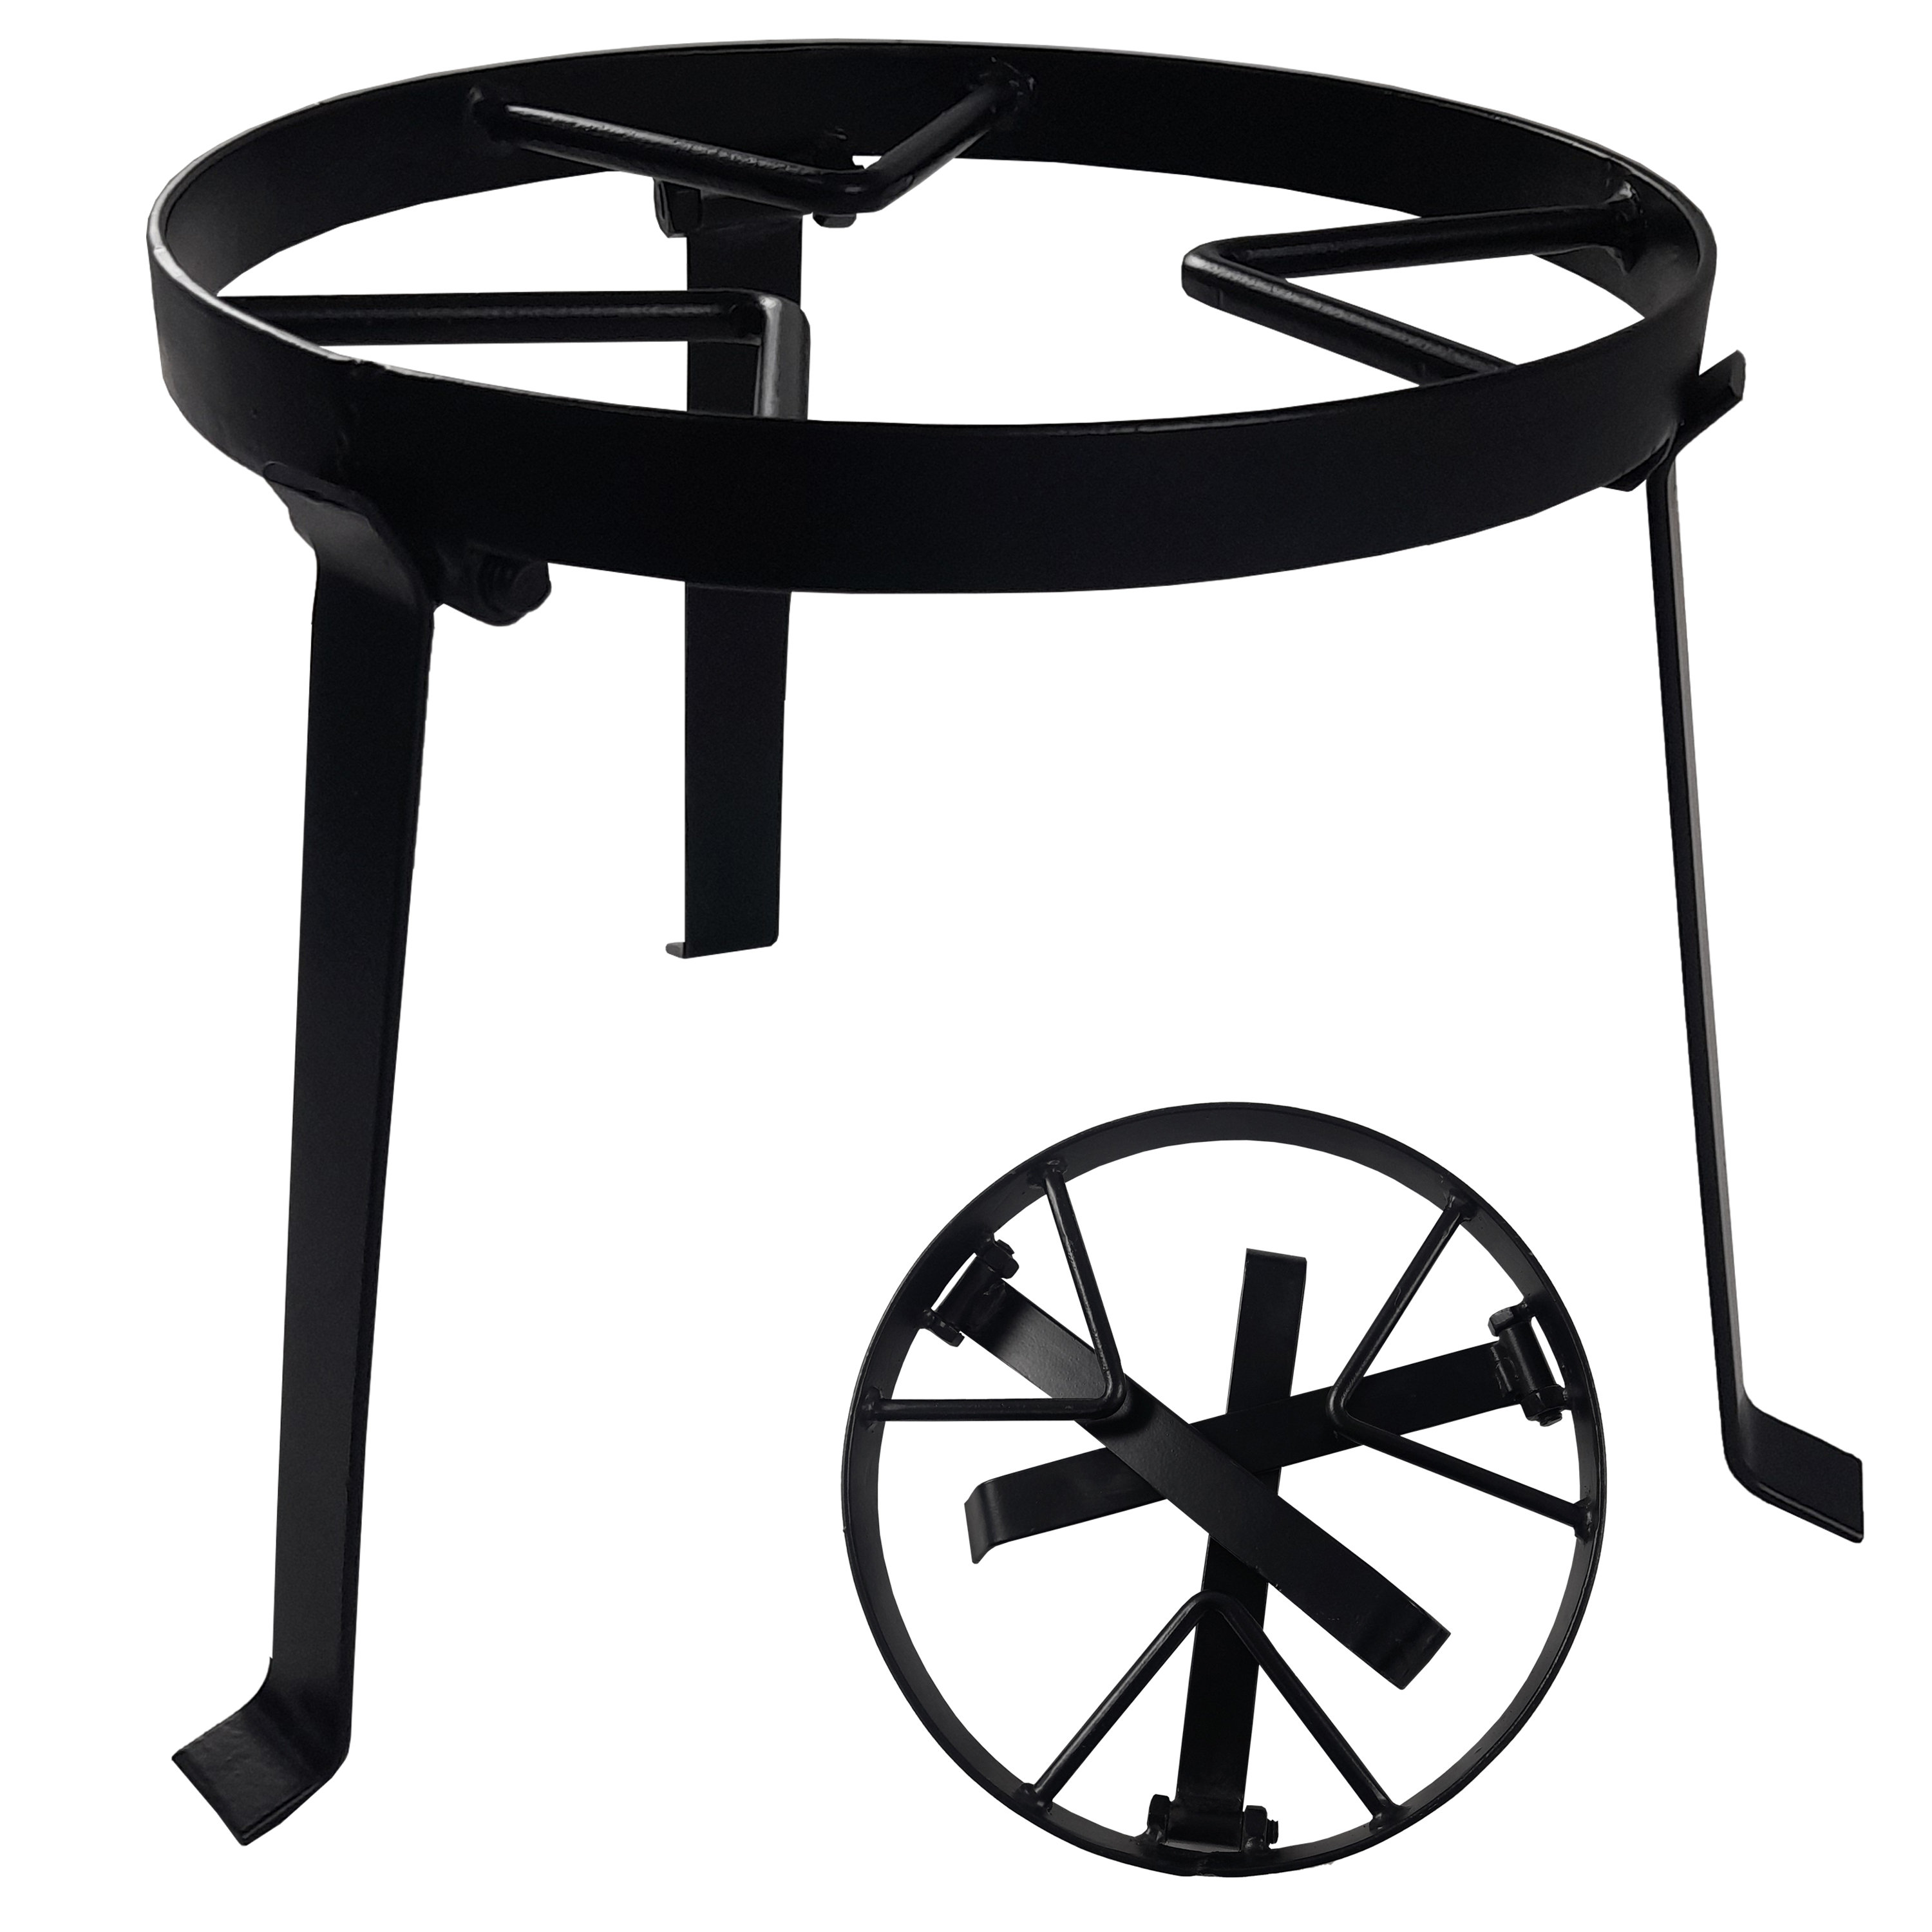 Campfire pot holder, 3 legged stand for dutch ovens & camp ovens to cook  over campfires or fire pits. Ma…